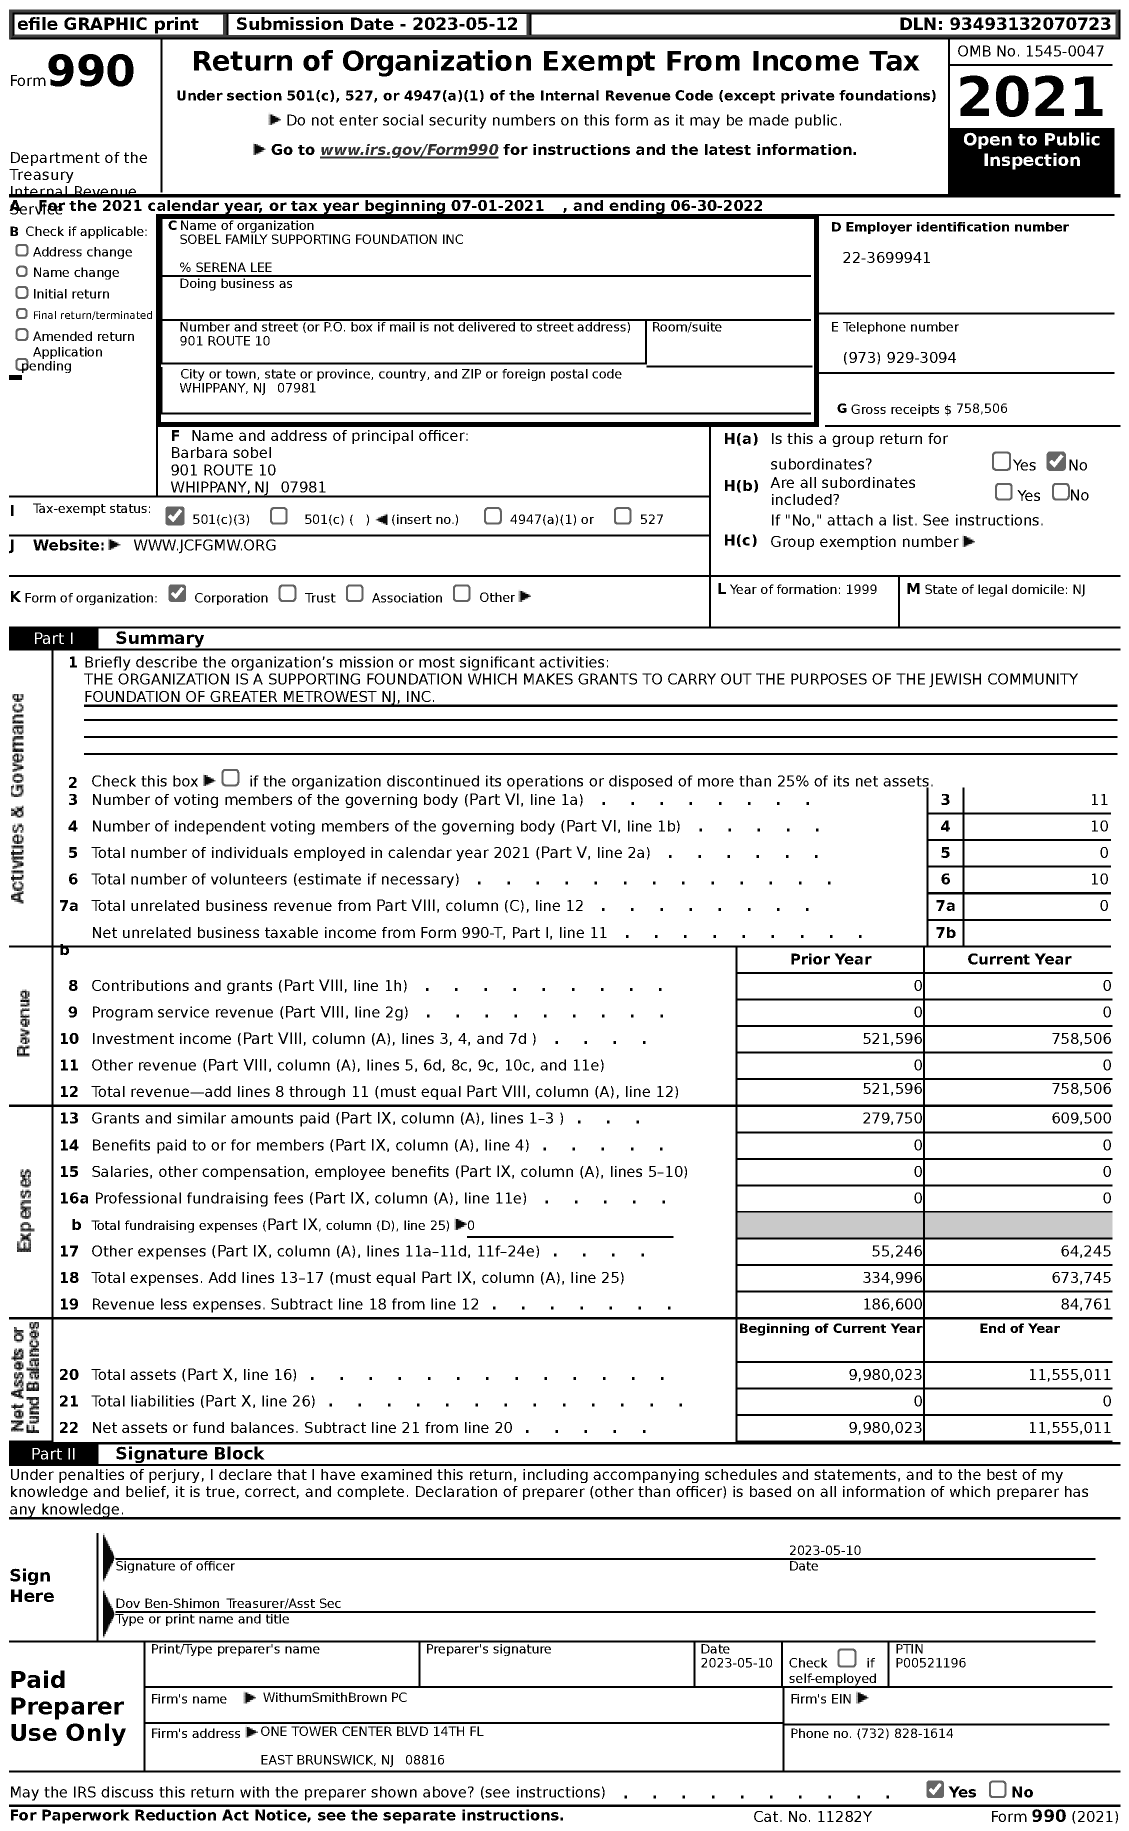 Image of first page of 2021 Form 990 for Sobel Family Supporting Foundation